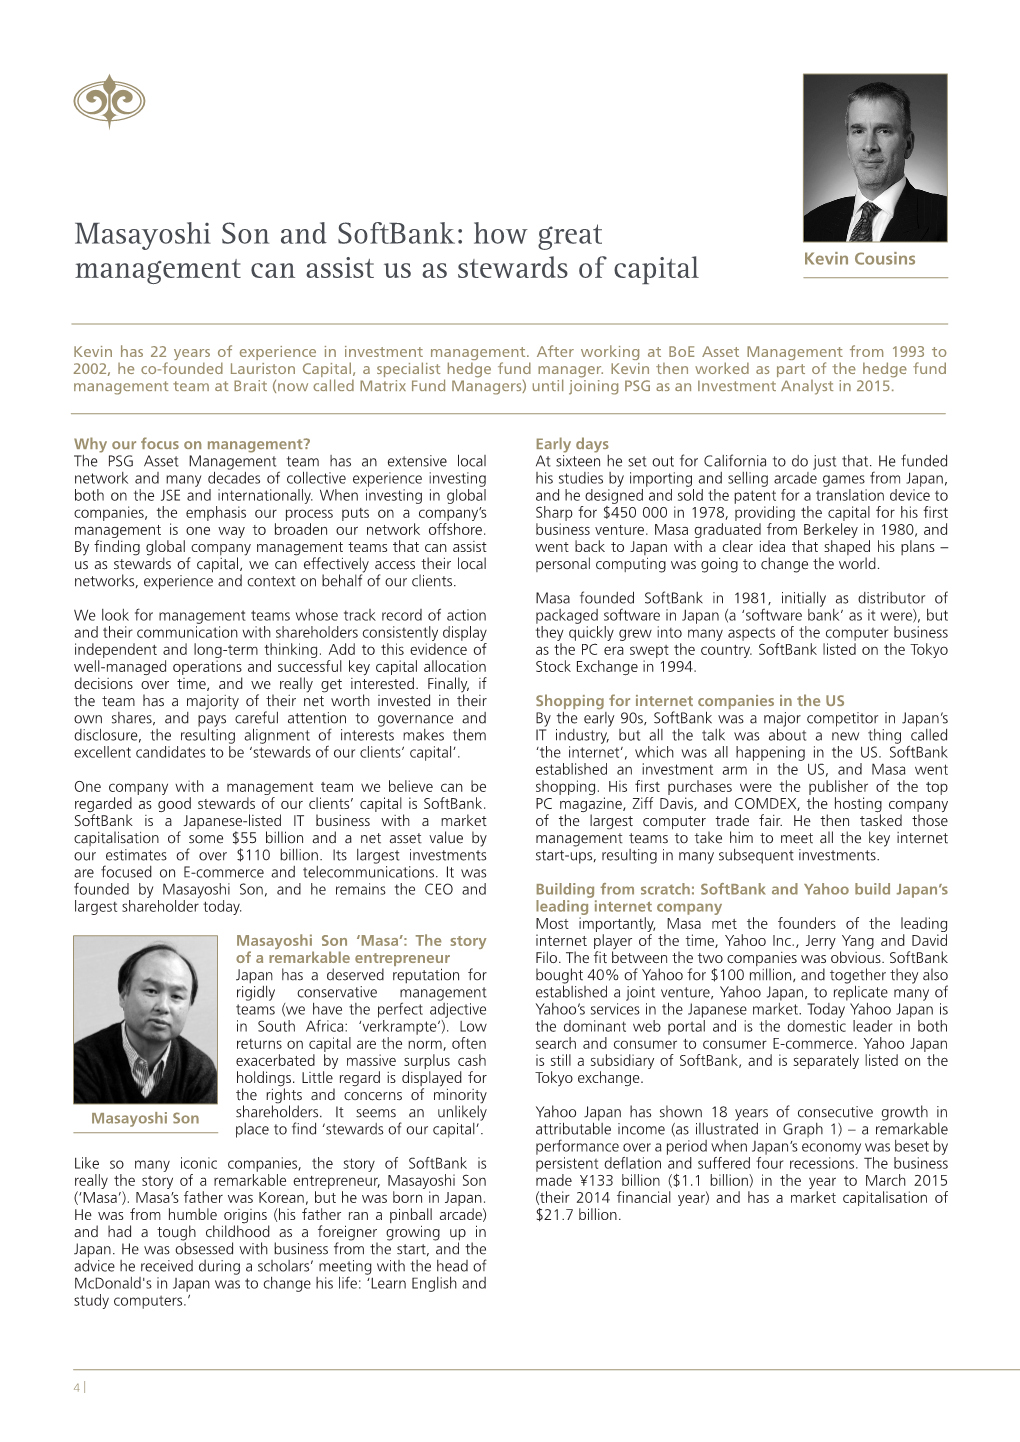 Masayoshi Son and Softbank: How Great Management Can Assist Us As Stewards of Capital Kevin Cousins